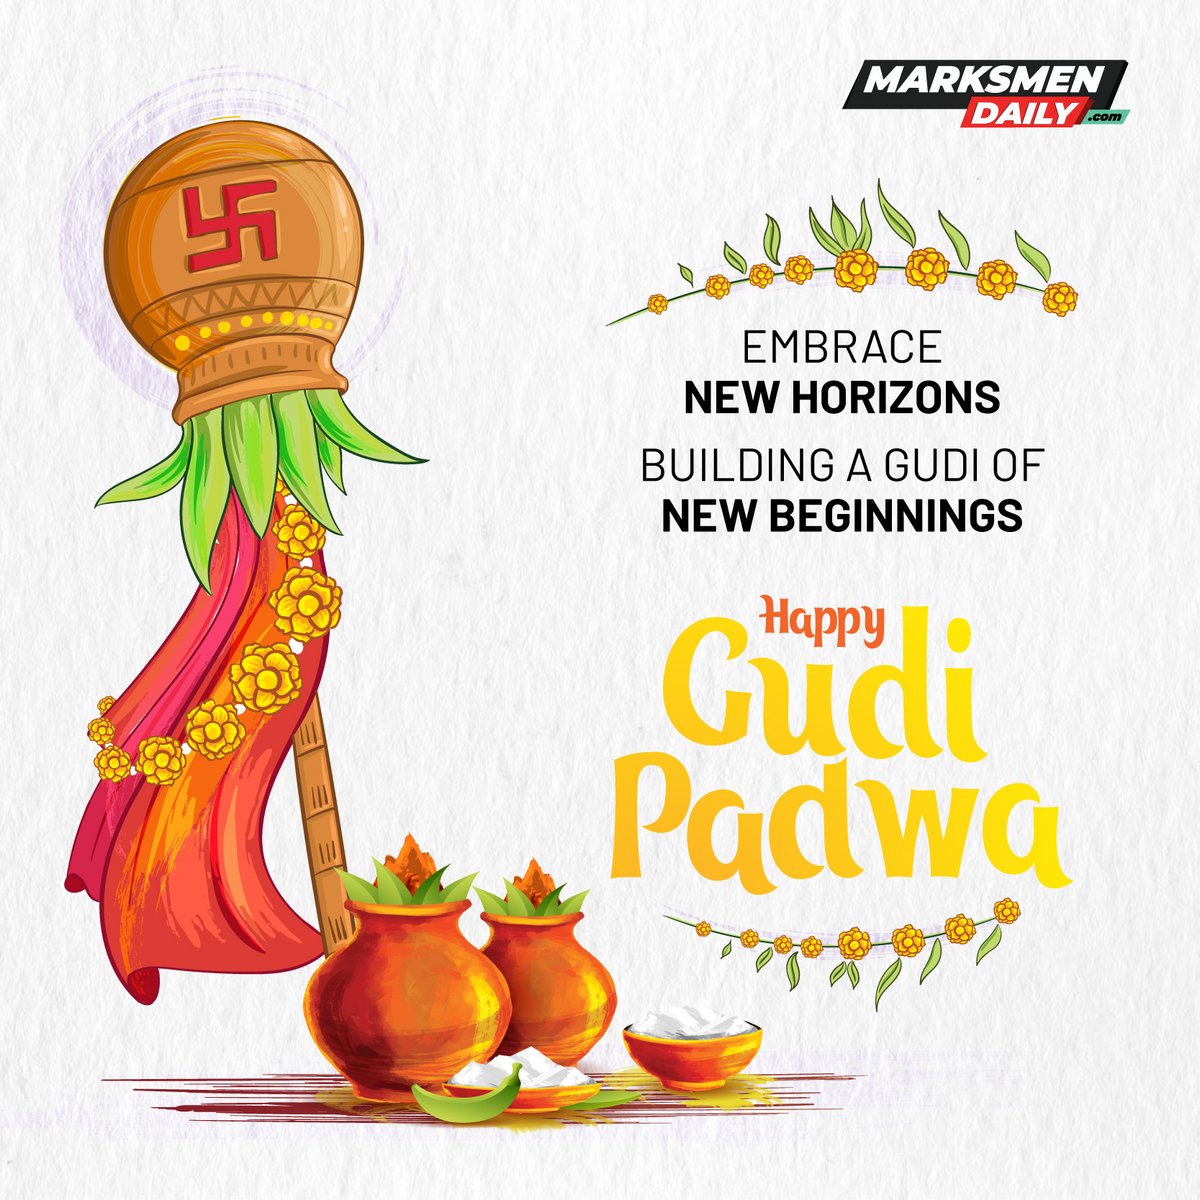 As we raise the Gudi high, let's celebrate the triumph of positivity and the spirit of new beginnings. Wishing you and your loved ones a Happy Gudi Padwa! #GudiPadwa #NewHorizons #NewBeginnings #Prosperity #Celebration #IndianFestival #JoyfulMoments